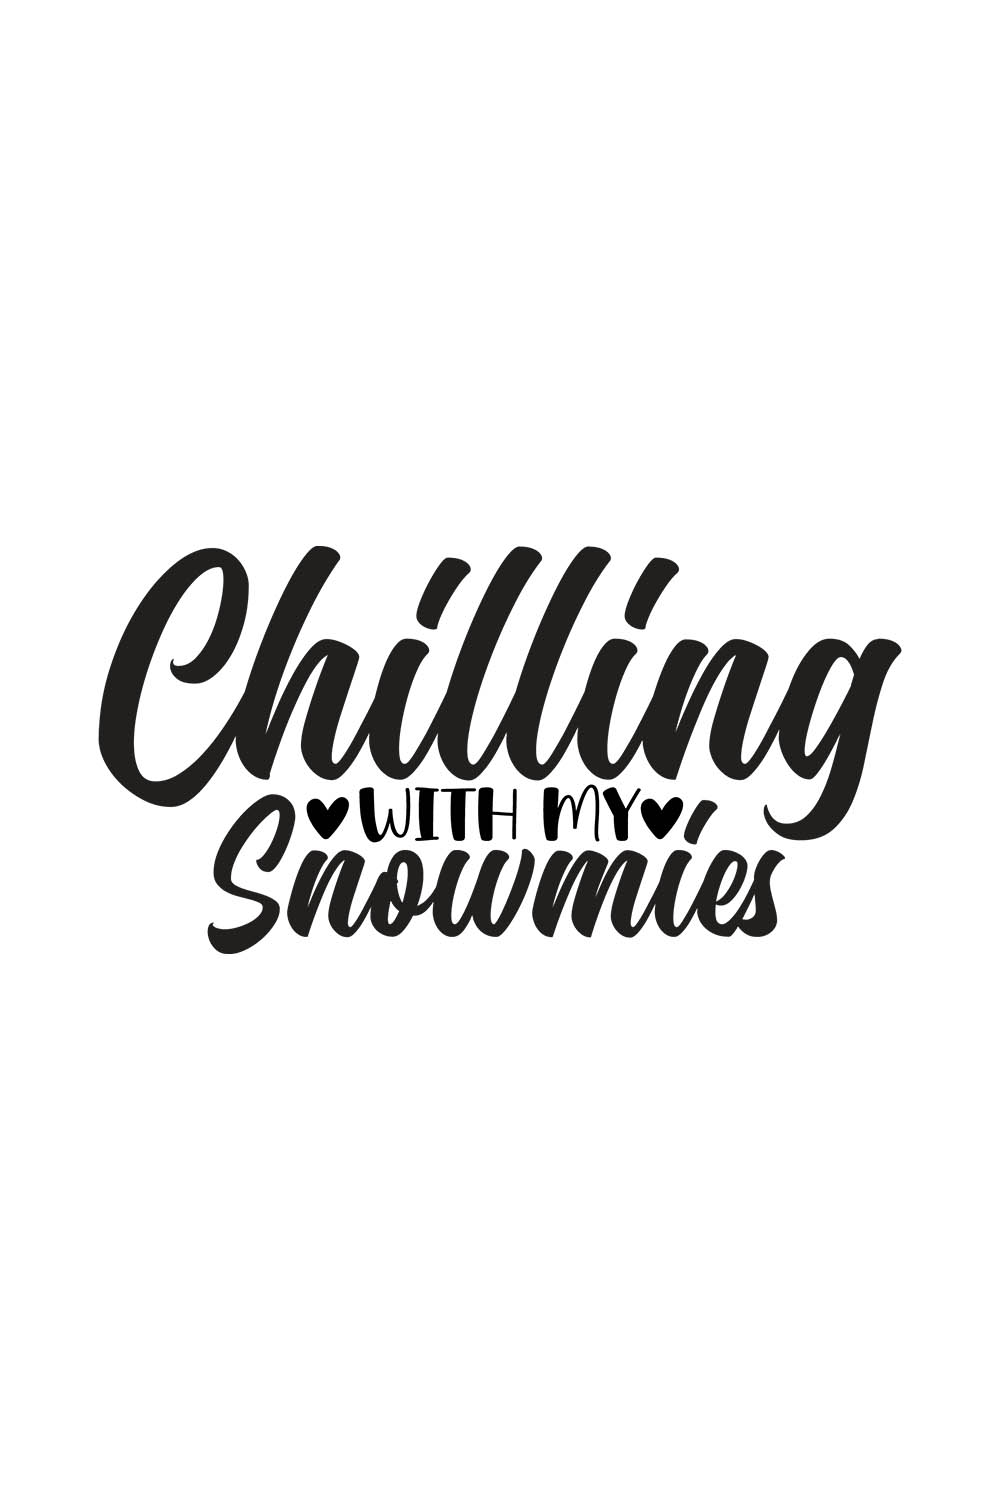 Image with unique black lettering for Chilling With My Snowmies prints.